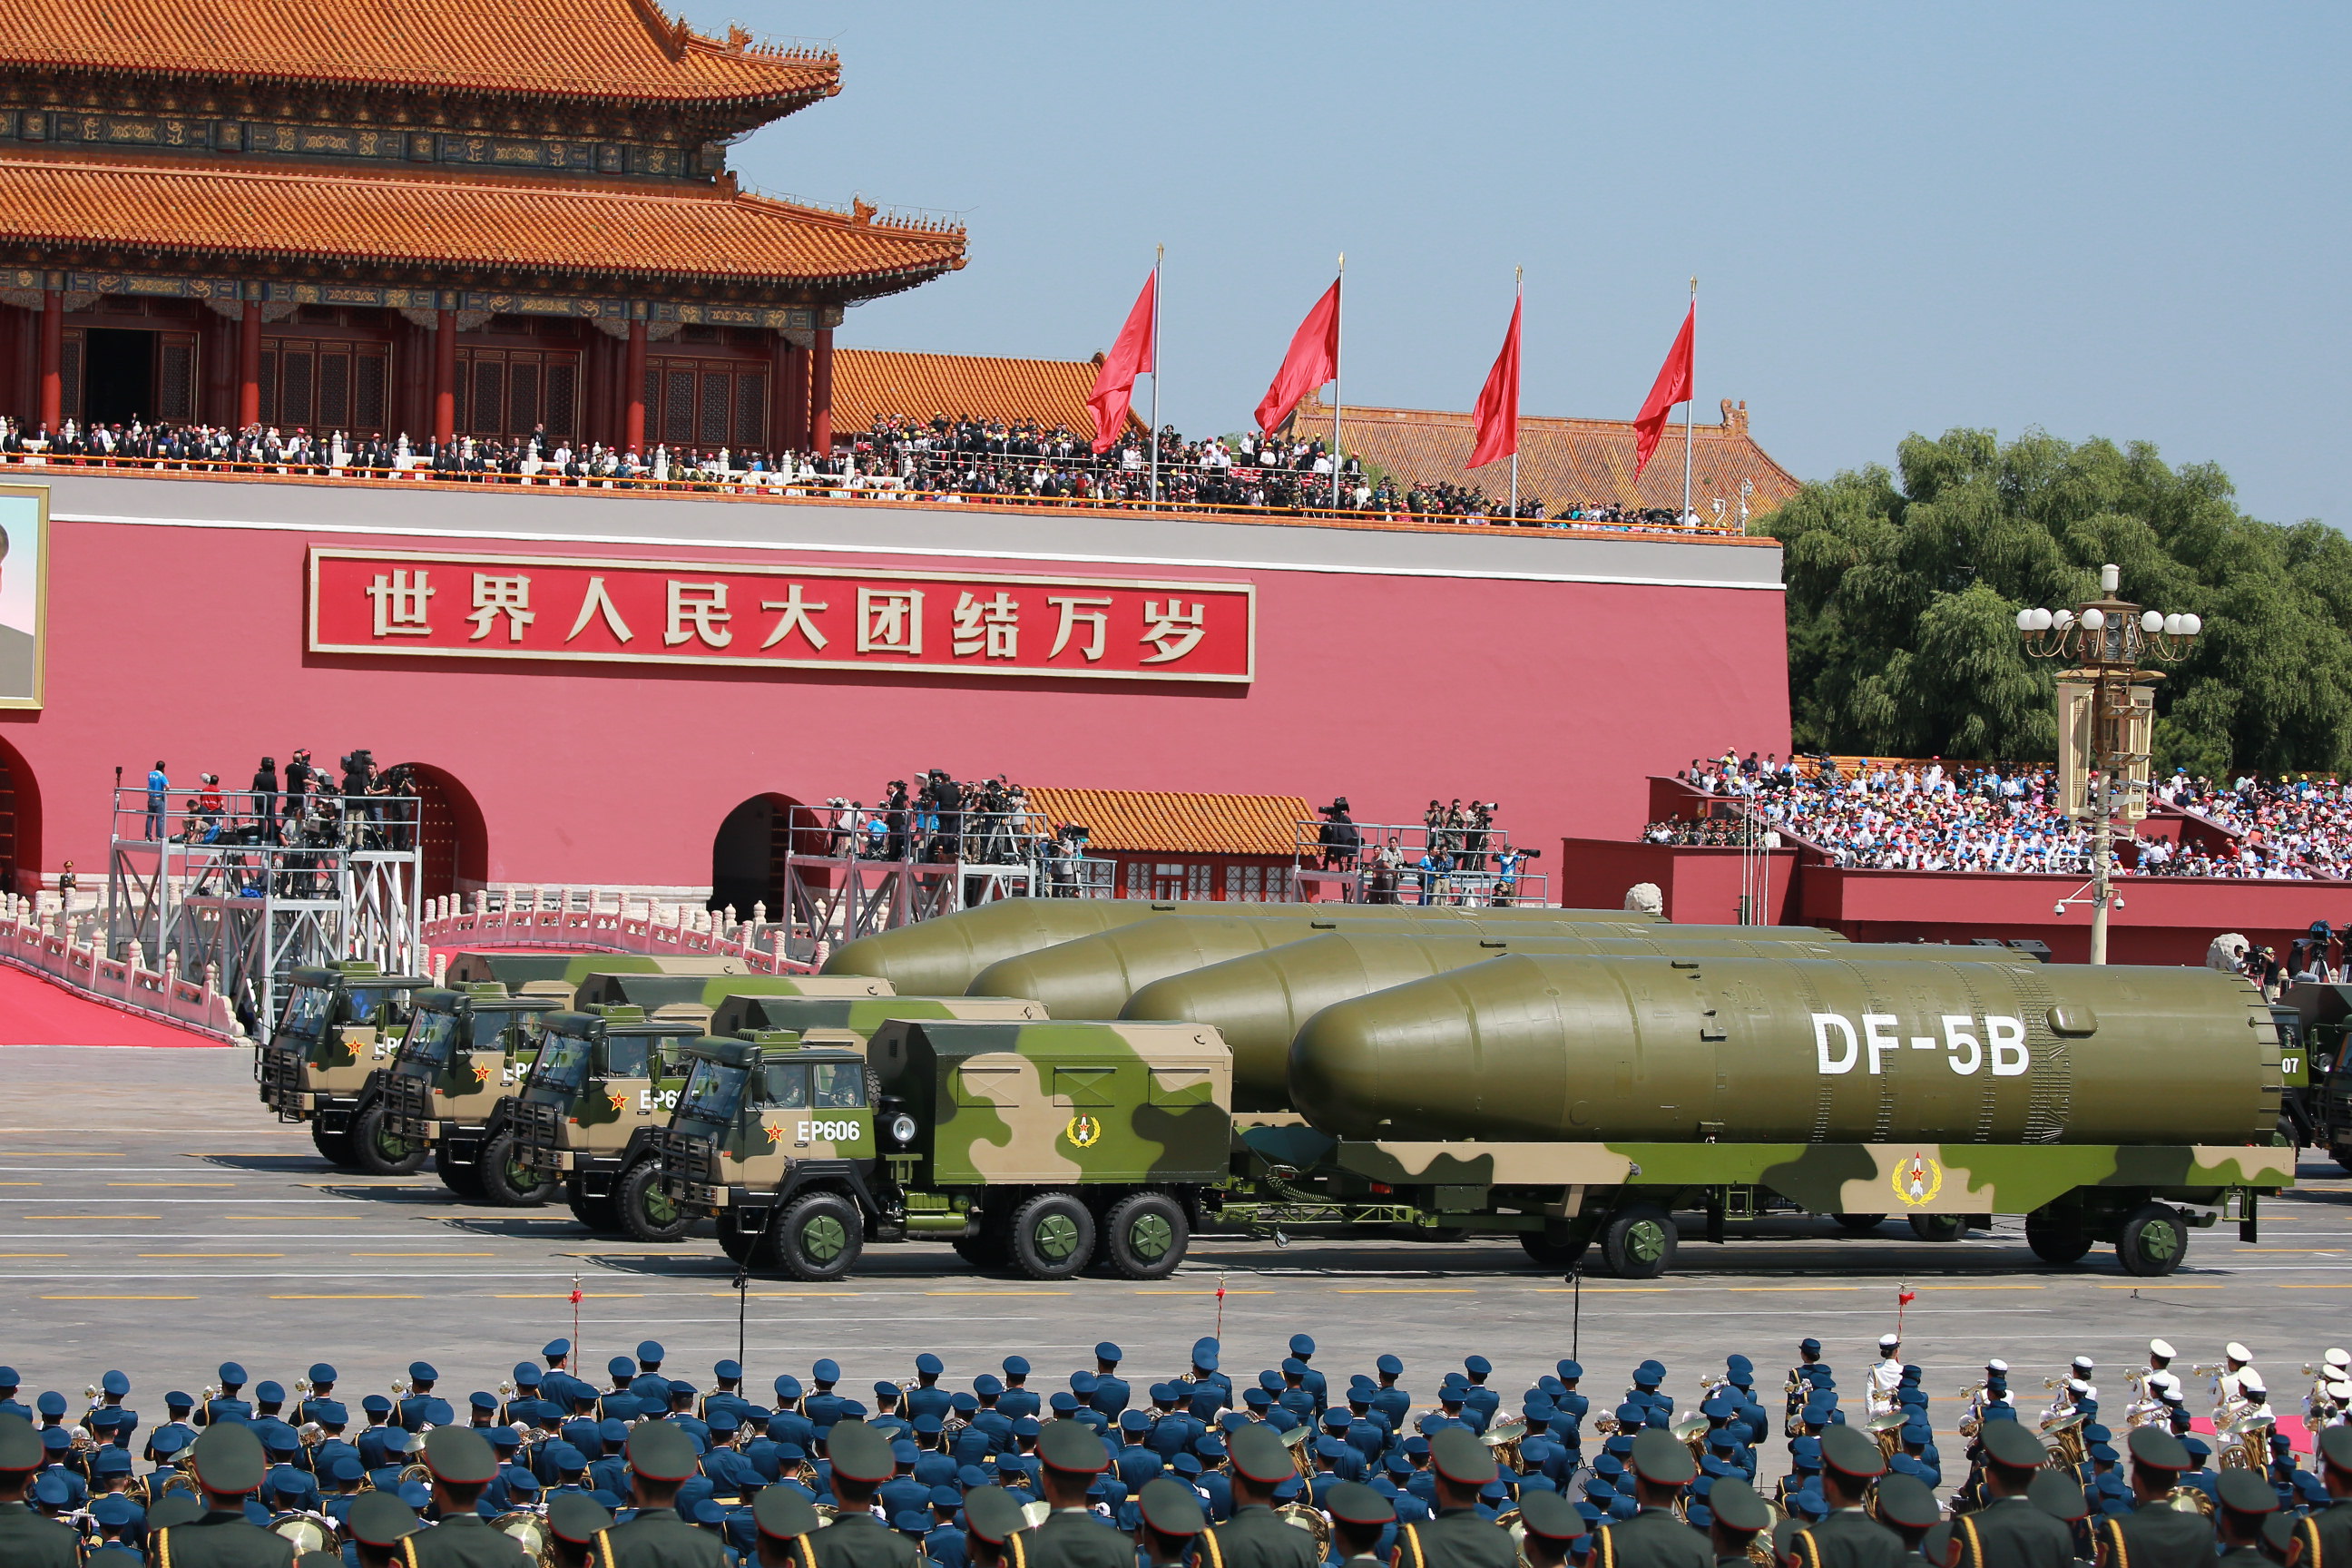 Military vehicles carrying DF-5B liquid-fuel intercontinental ballistic missiles (ICBM) march past the Tiananmen Rostrum during the military parade to commemorate the 70th anniversary of the victory in the Chinese People's War of Resistance Against Japanese Aggression in Beijing, China, 3 September 2015.

China has pledged to cut the number of troops in its army by 300,000, in an unexpected announcement made by Chinese president Xi Jinping on Thursday (3 September 2015). Xi disclosed the news during a speech made before the beginning of a huge military parade in Beijing's Tiananmen Square, held to mark the end of World War II and celebrate China's victory over Japan. Xi said that a 13% cut would be made in the country's 2.3 million-armed forces, stressing that China was committed to peace, although he gave no indication of when it would be implemented. 